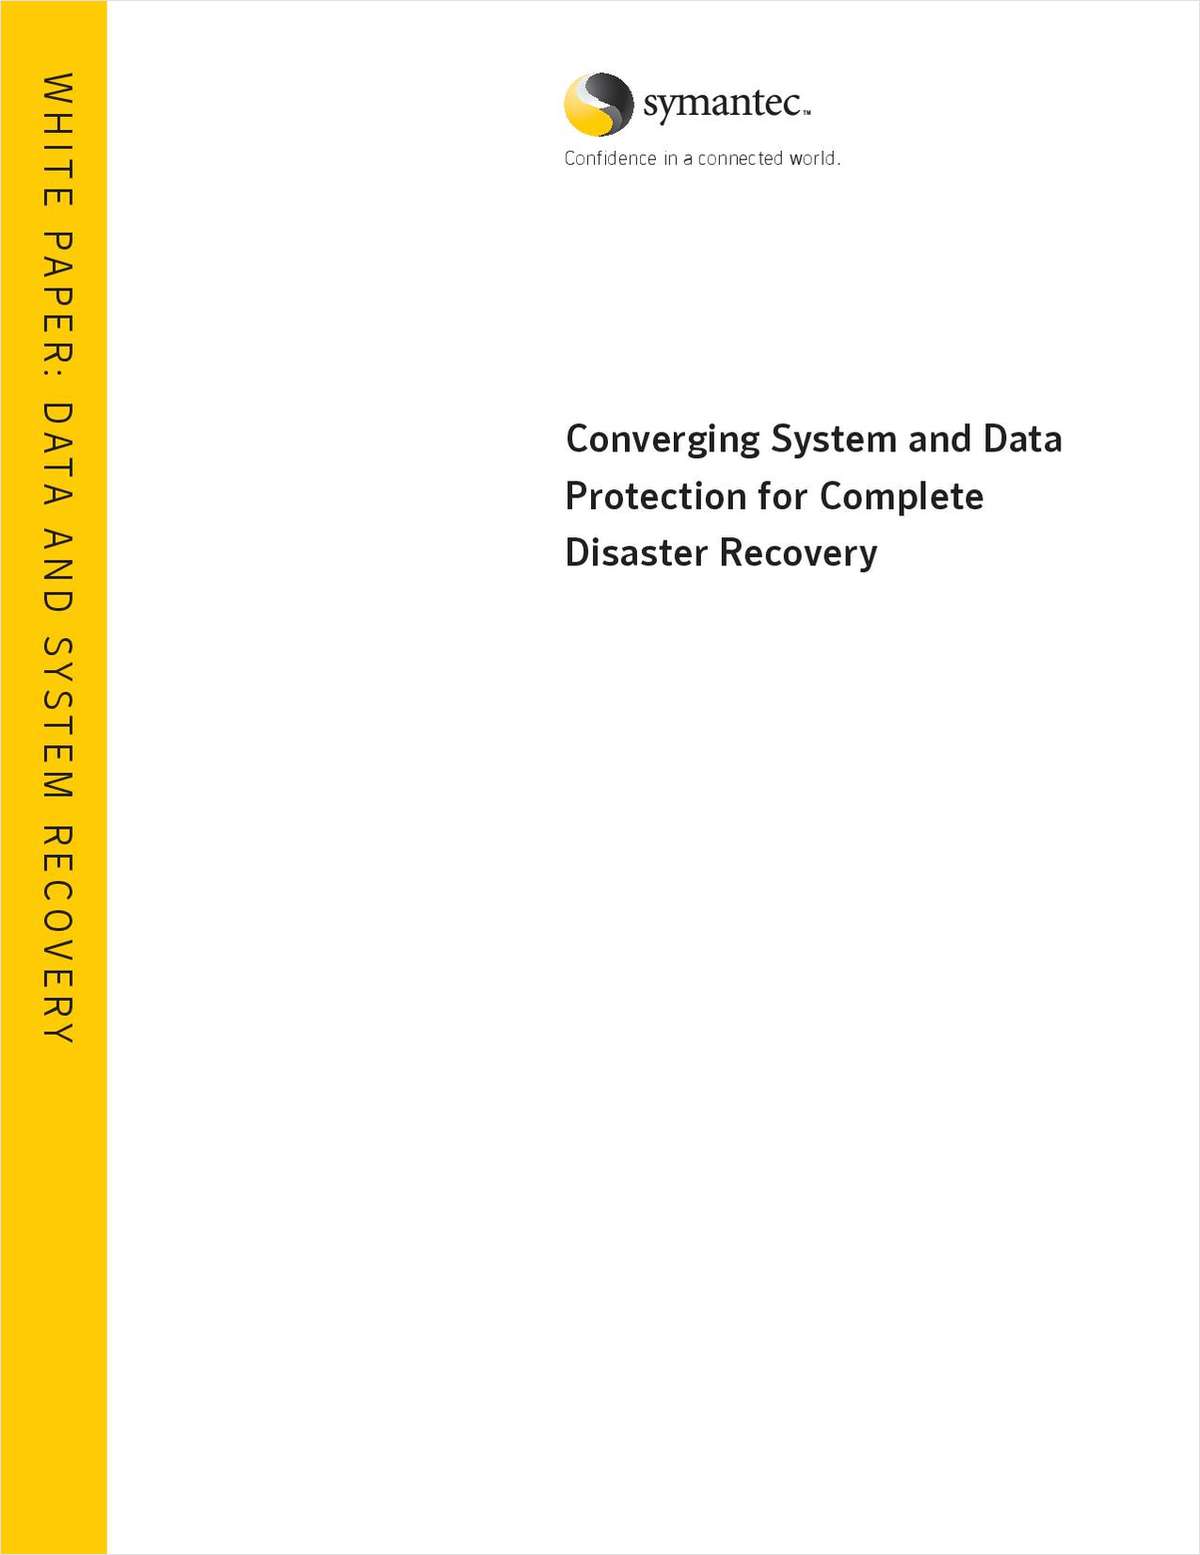 Converging System and Data Protection for Complete Disaster Recovery